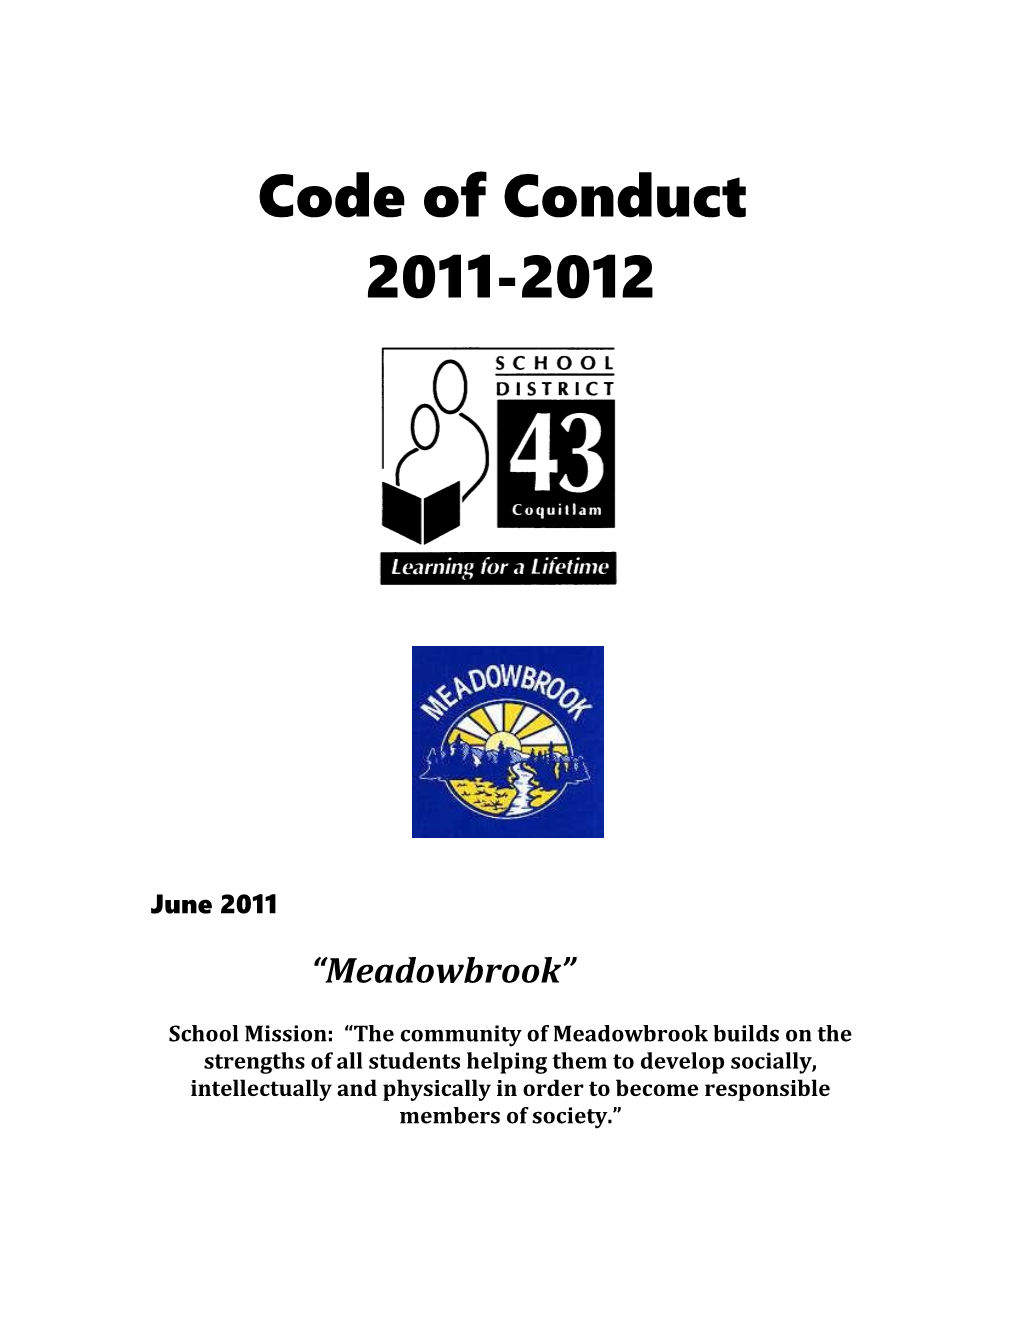 Meadowbrook Code of Conduct